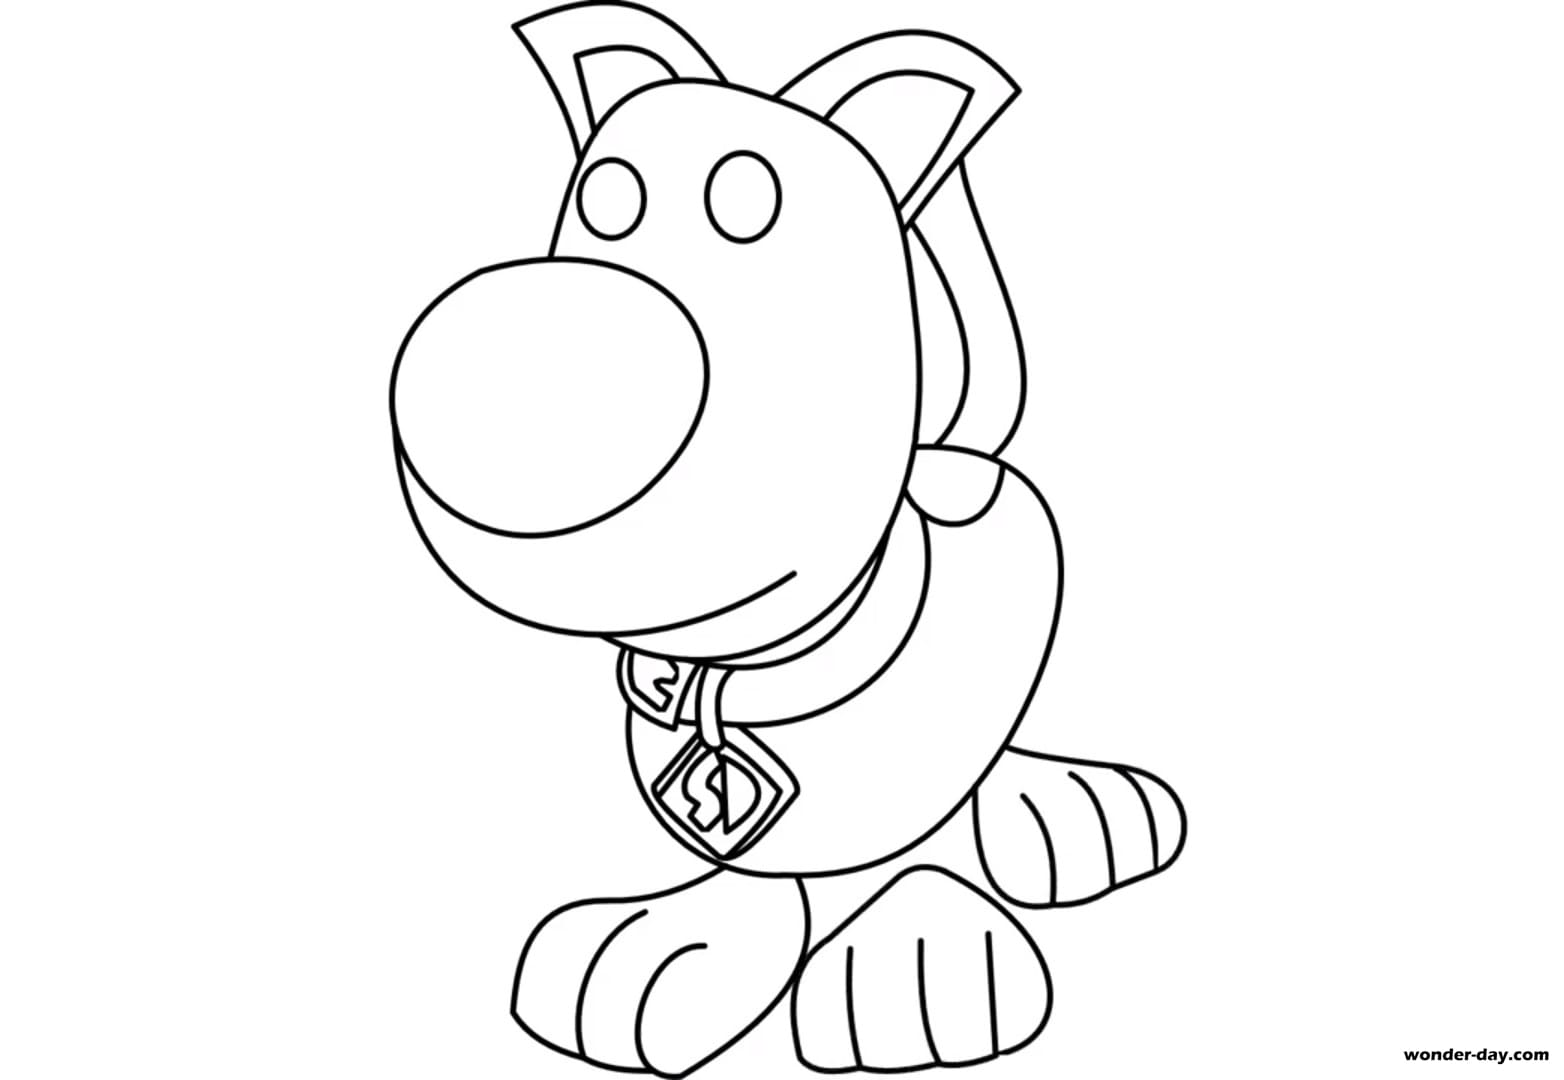 Adopt Me Coloring Pages Coloring Home - roblox coloring pages adopt me pets